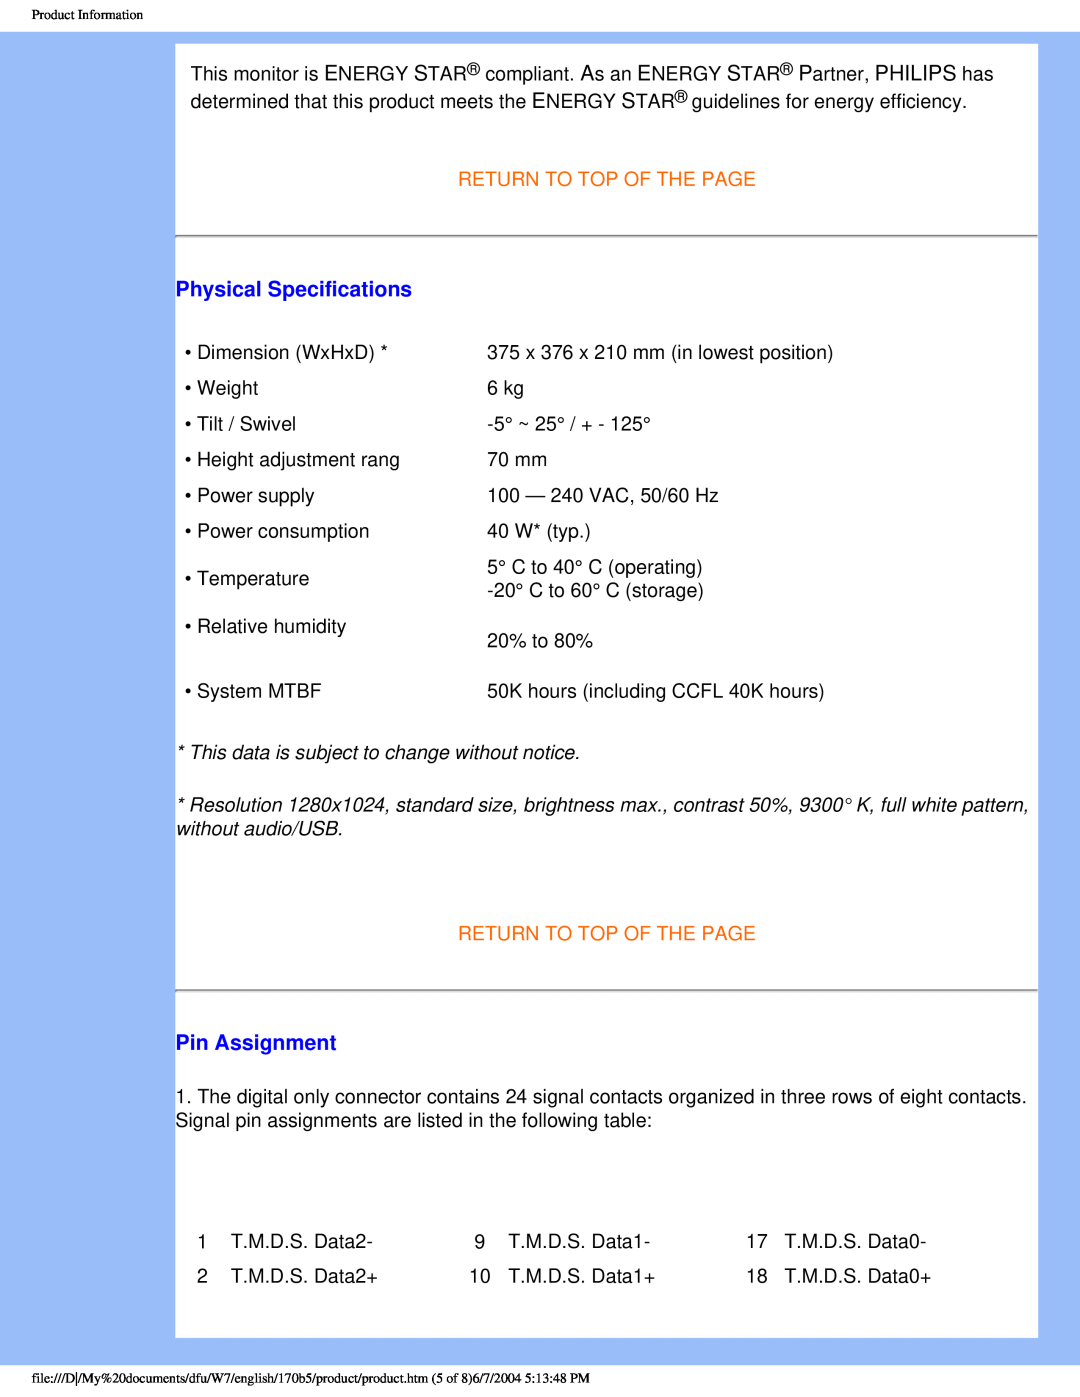 Philips 170B5 user manual Physical Specifications, Pin Assignment, Signal 